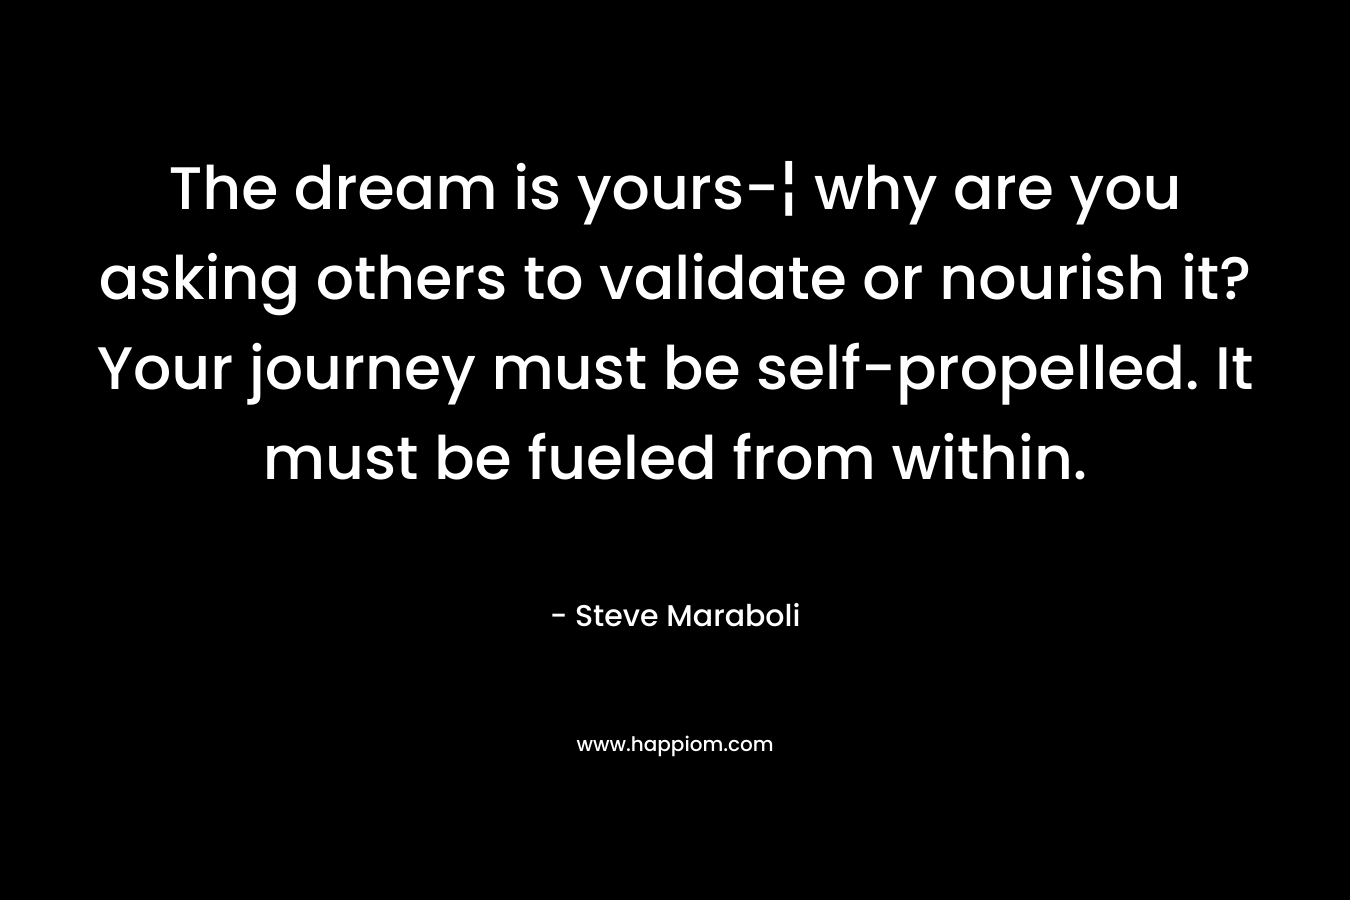 The dream is yours-¦ why are you asking others to validate or nourish it? Your journey must be self-propelled. It must be fueled from within.